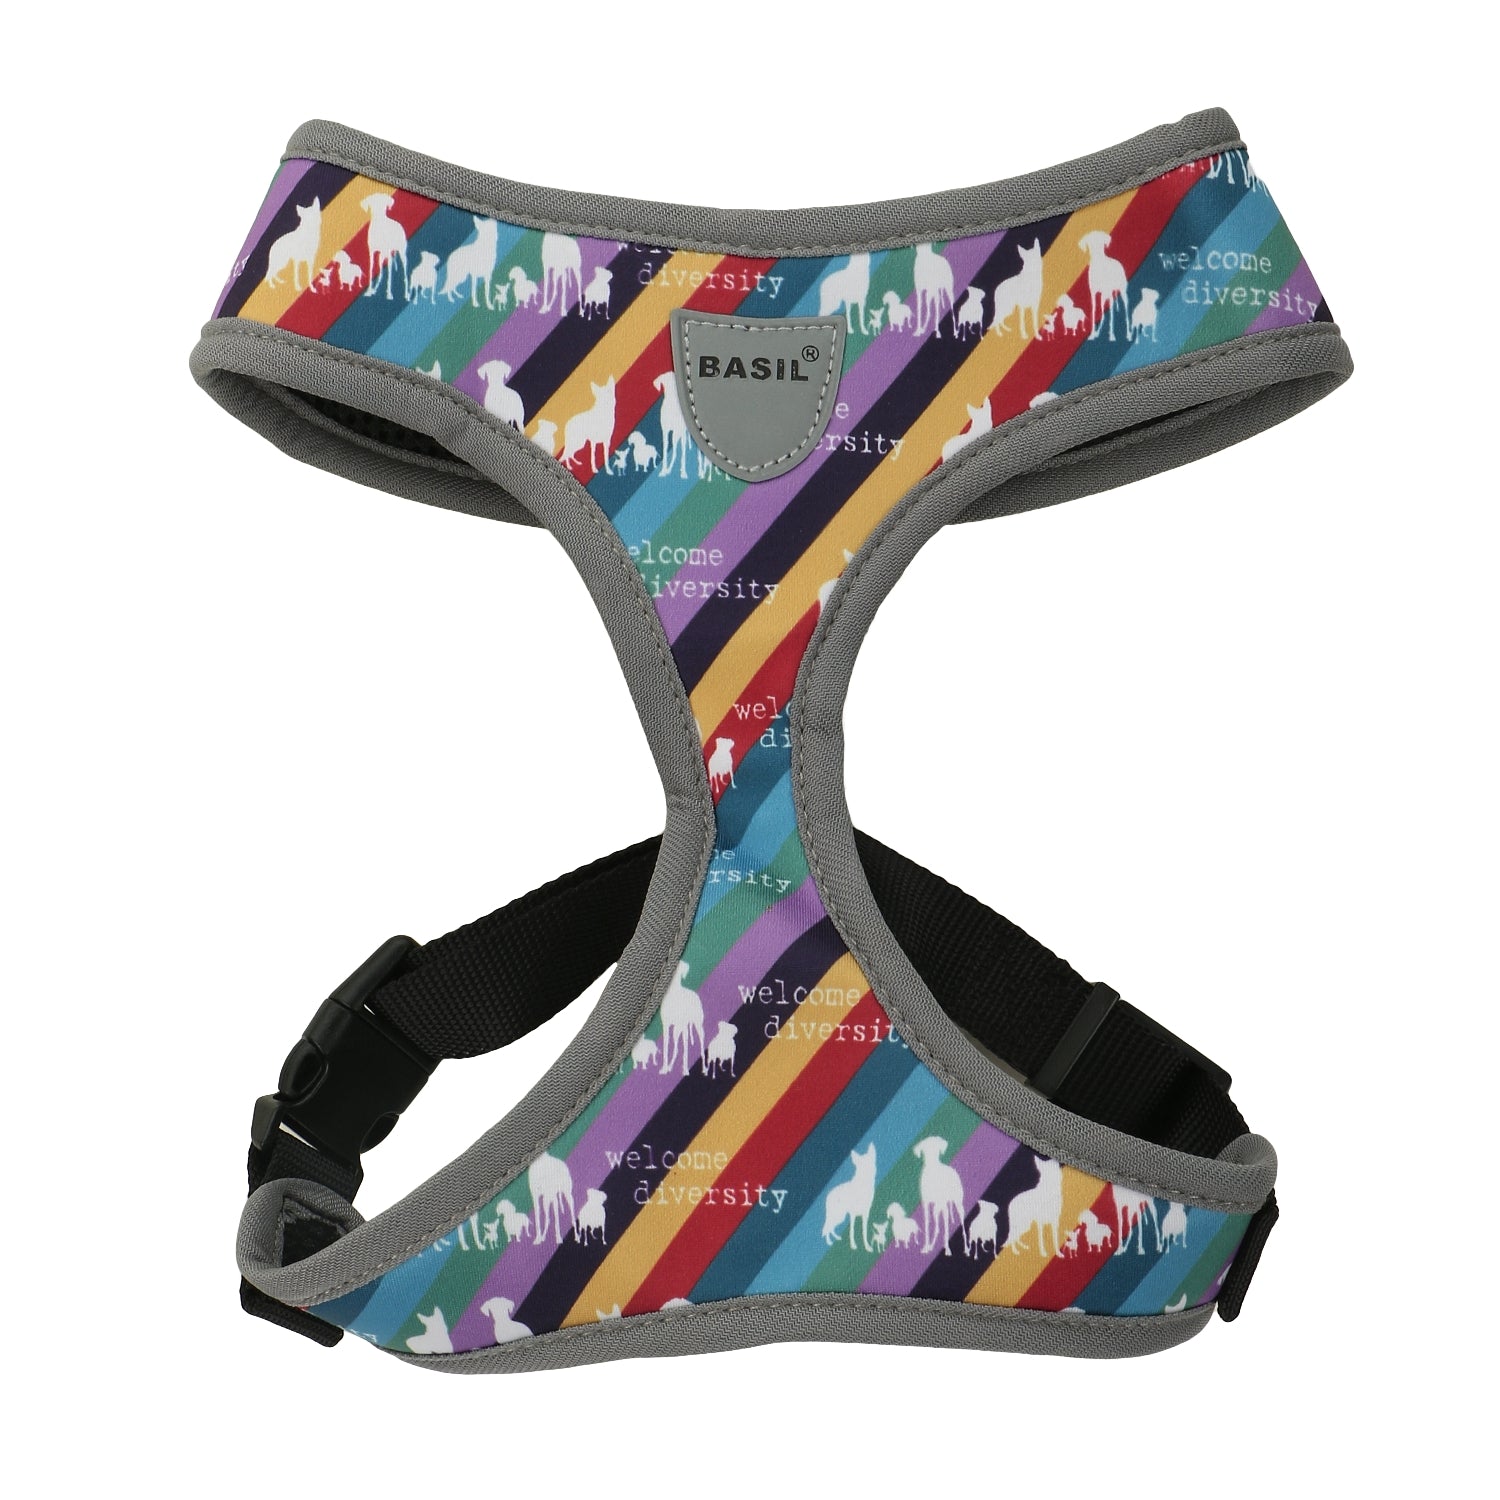 Basil - Printed Adjustable Mesh Harness for Puppy, Dogs & Cats Multicolor